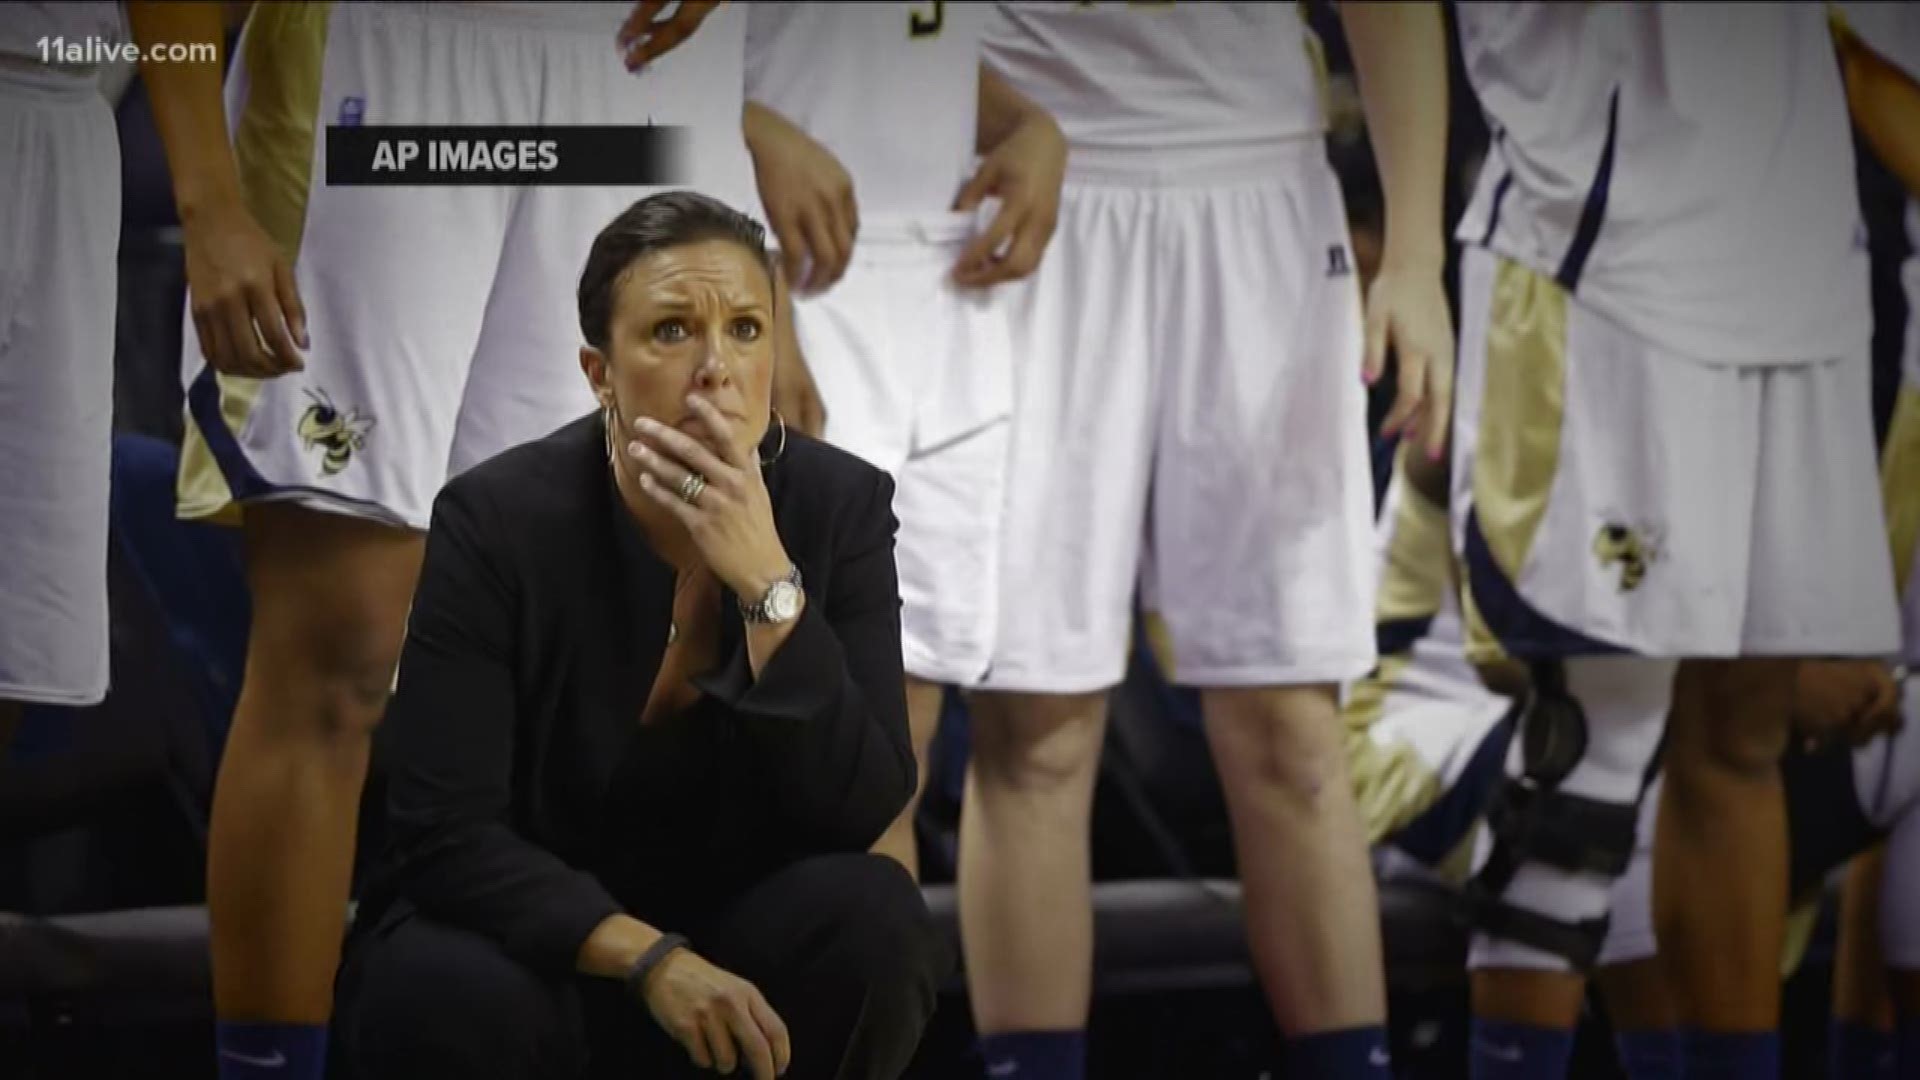 After 16 seasons, one Georgia Tech basketball coach is out. She was fired for allegedly fostering a 'toxic' and 'hostile' atmosphere.